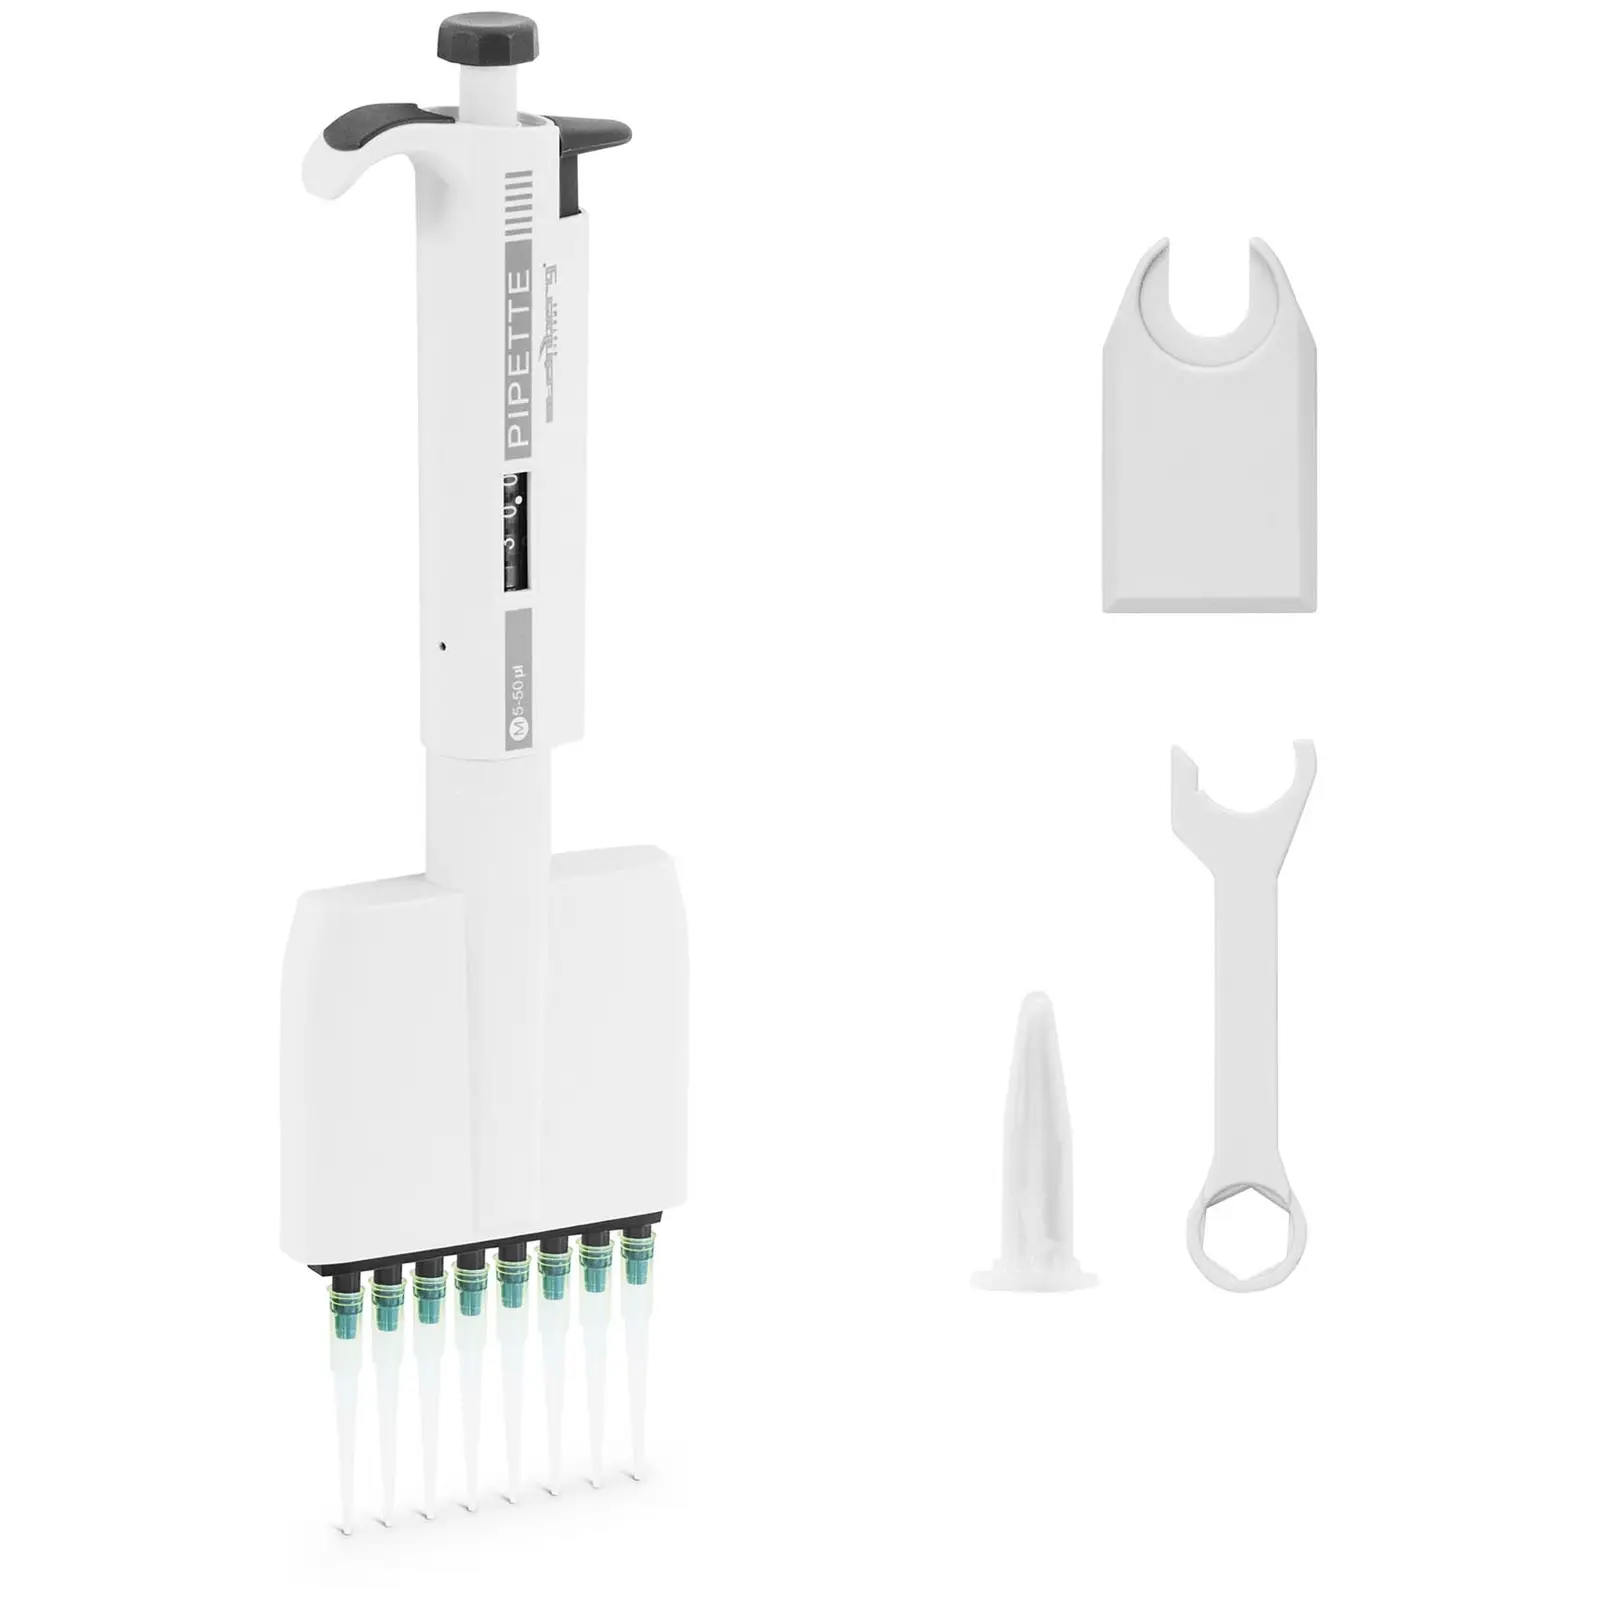 Multi-channel pipette for 8 tips 5 - 50 μl